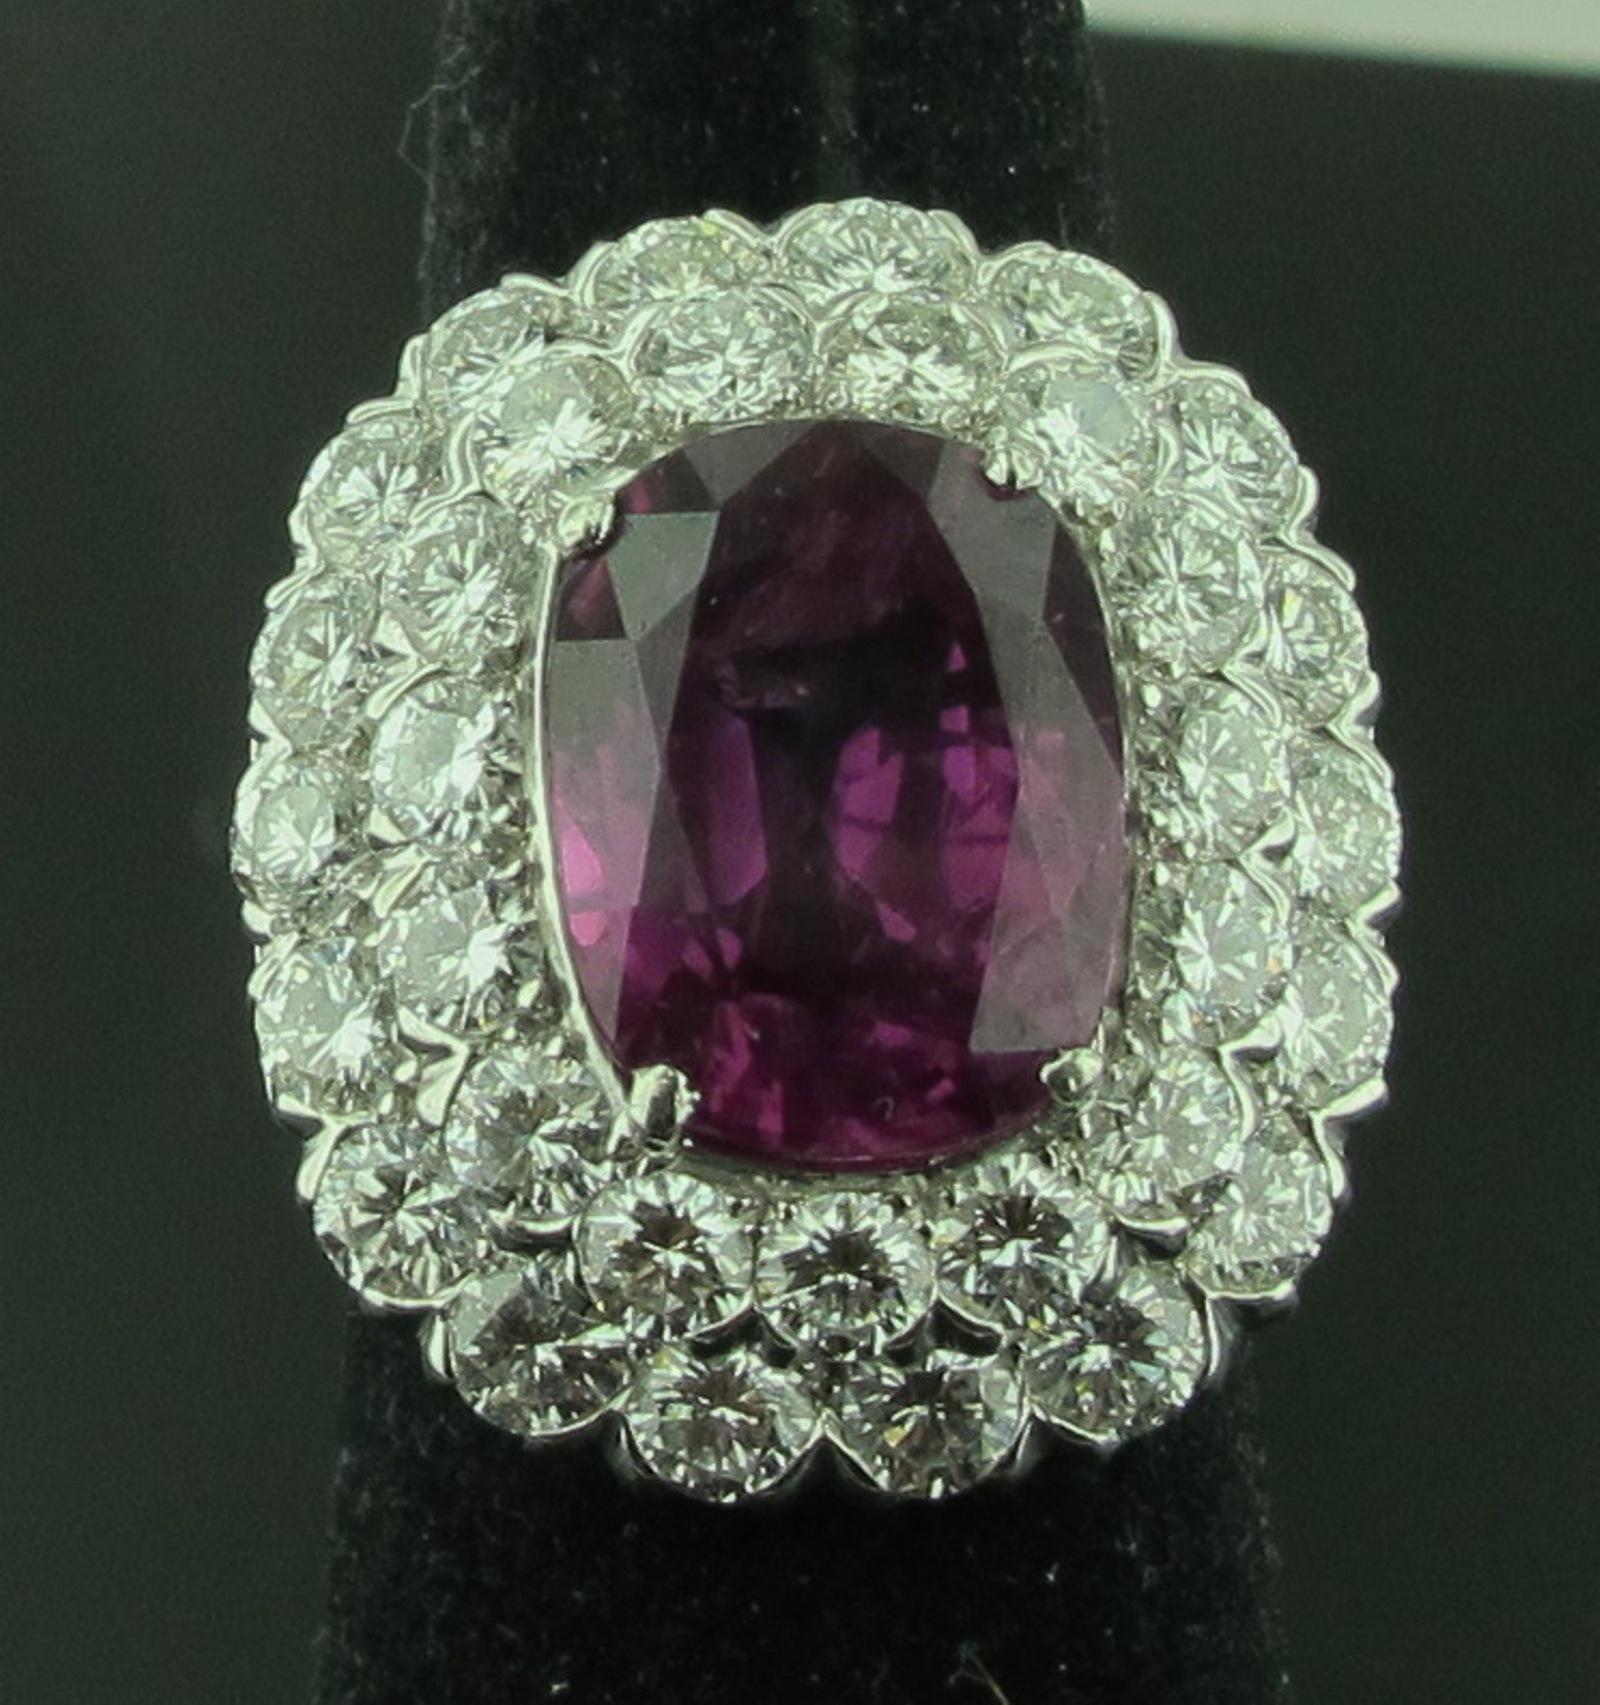 Signed RUSER.  Set in Platinum, in the center is a magnificent 8.39 carat Pink Sapphire surrounded by 43 round brilliant cut diamonds weighing 6.00 carats total. Color is F-G, Clarity is VS.   Pink Sapphire is GIA certified, No Heat.  Ring size 6.